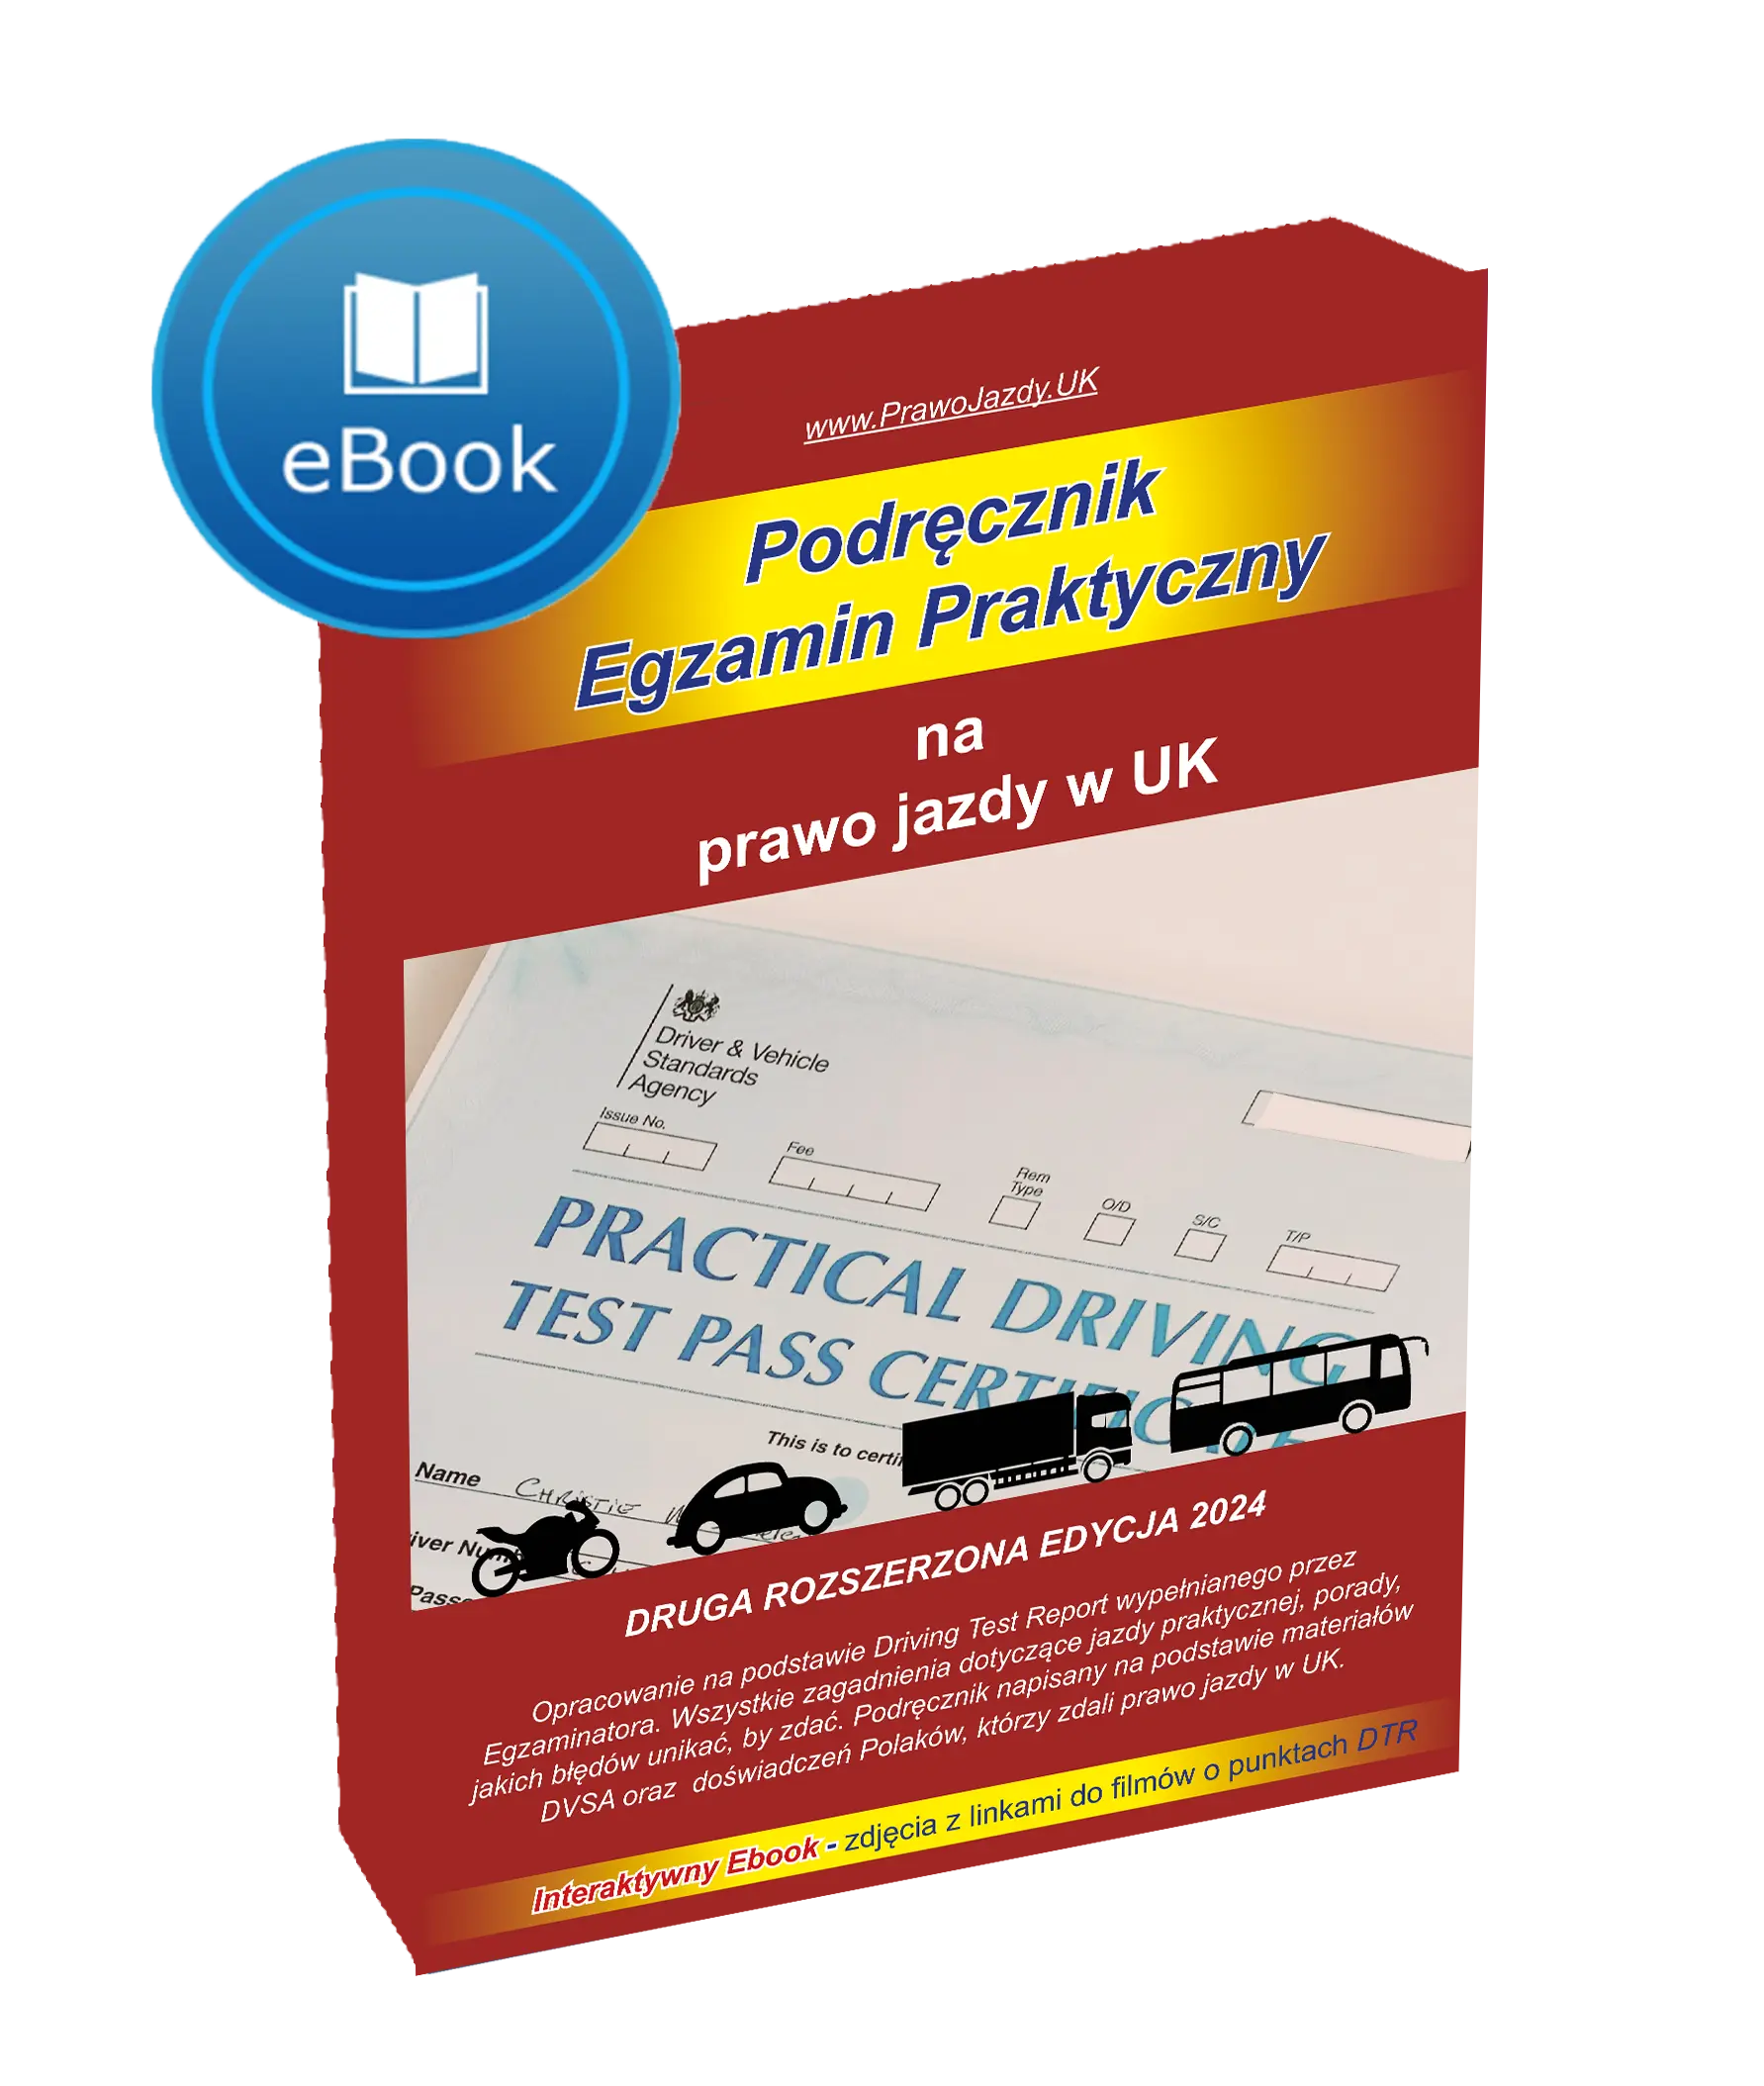 Practical driving exam test in Polish with translator